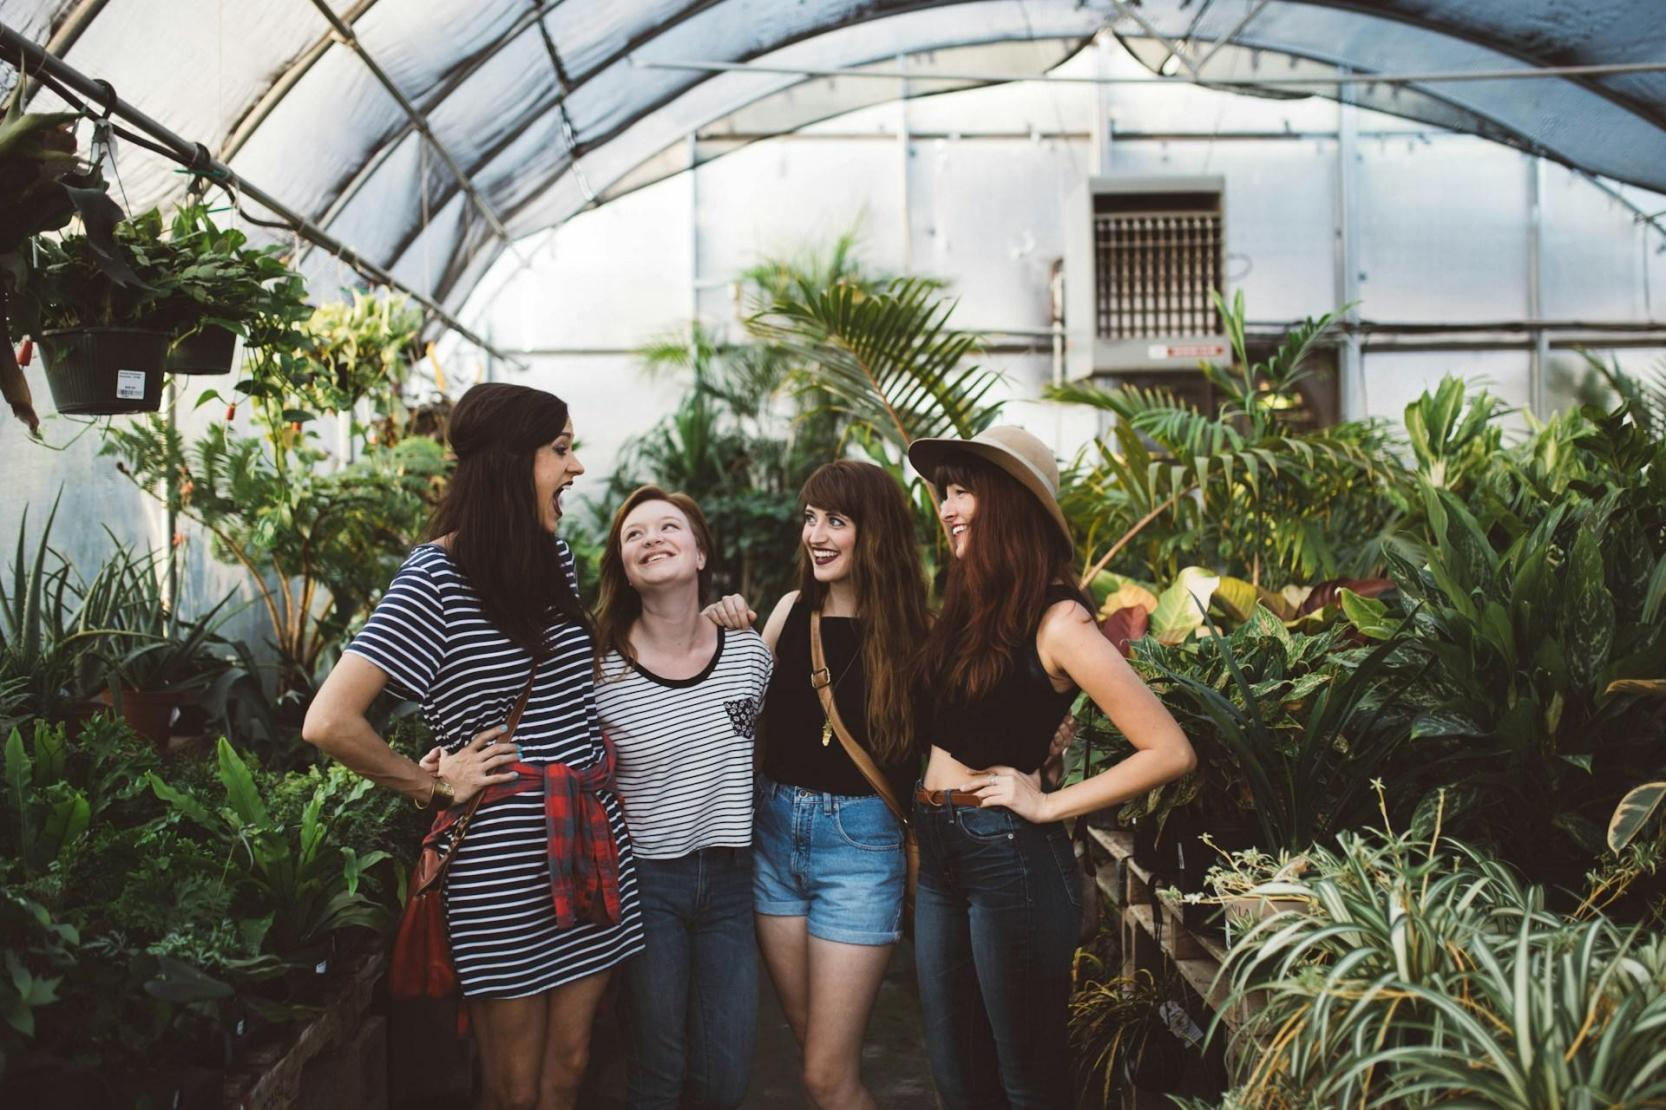 A group of friends hanging out in a greenhouse / polytunnel